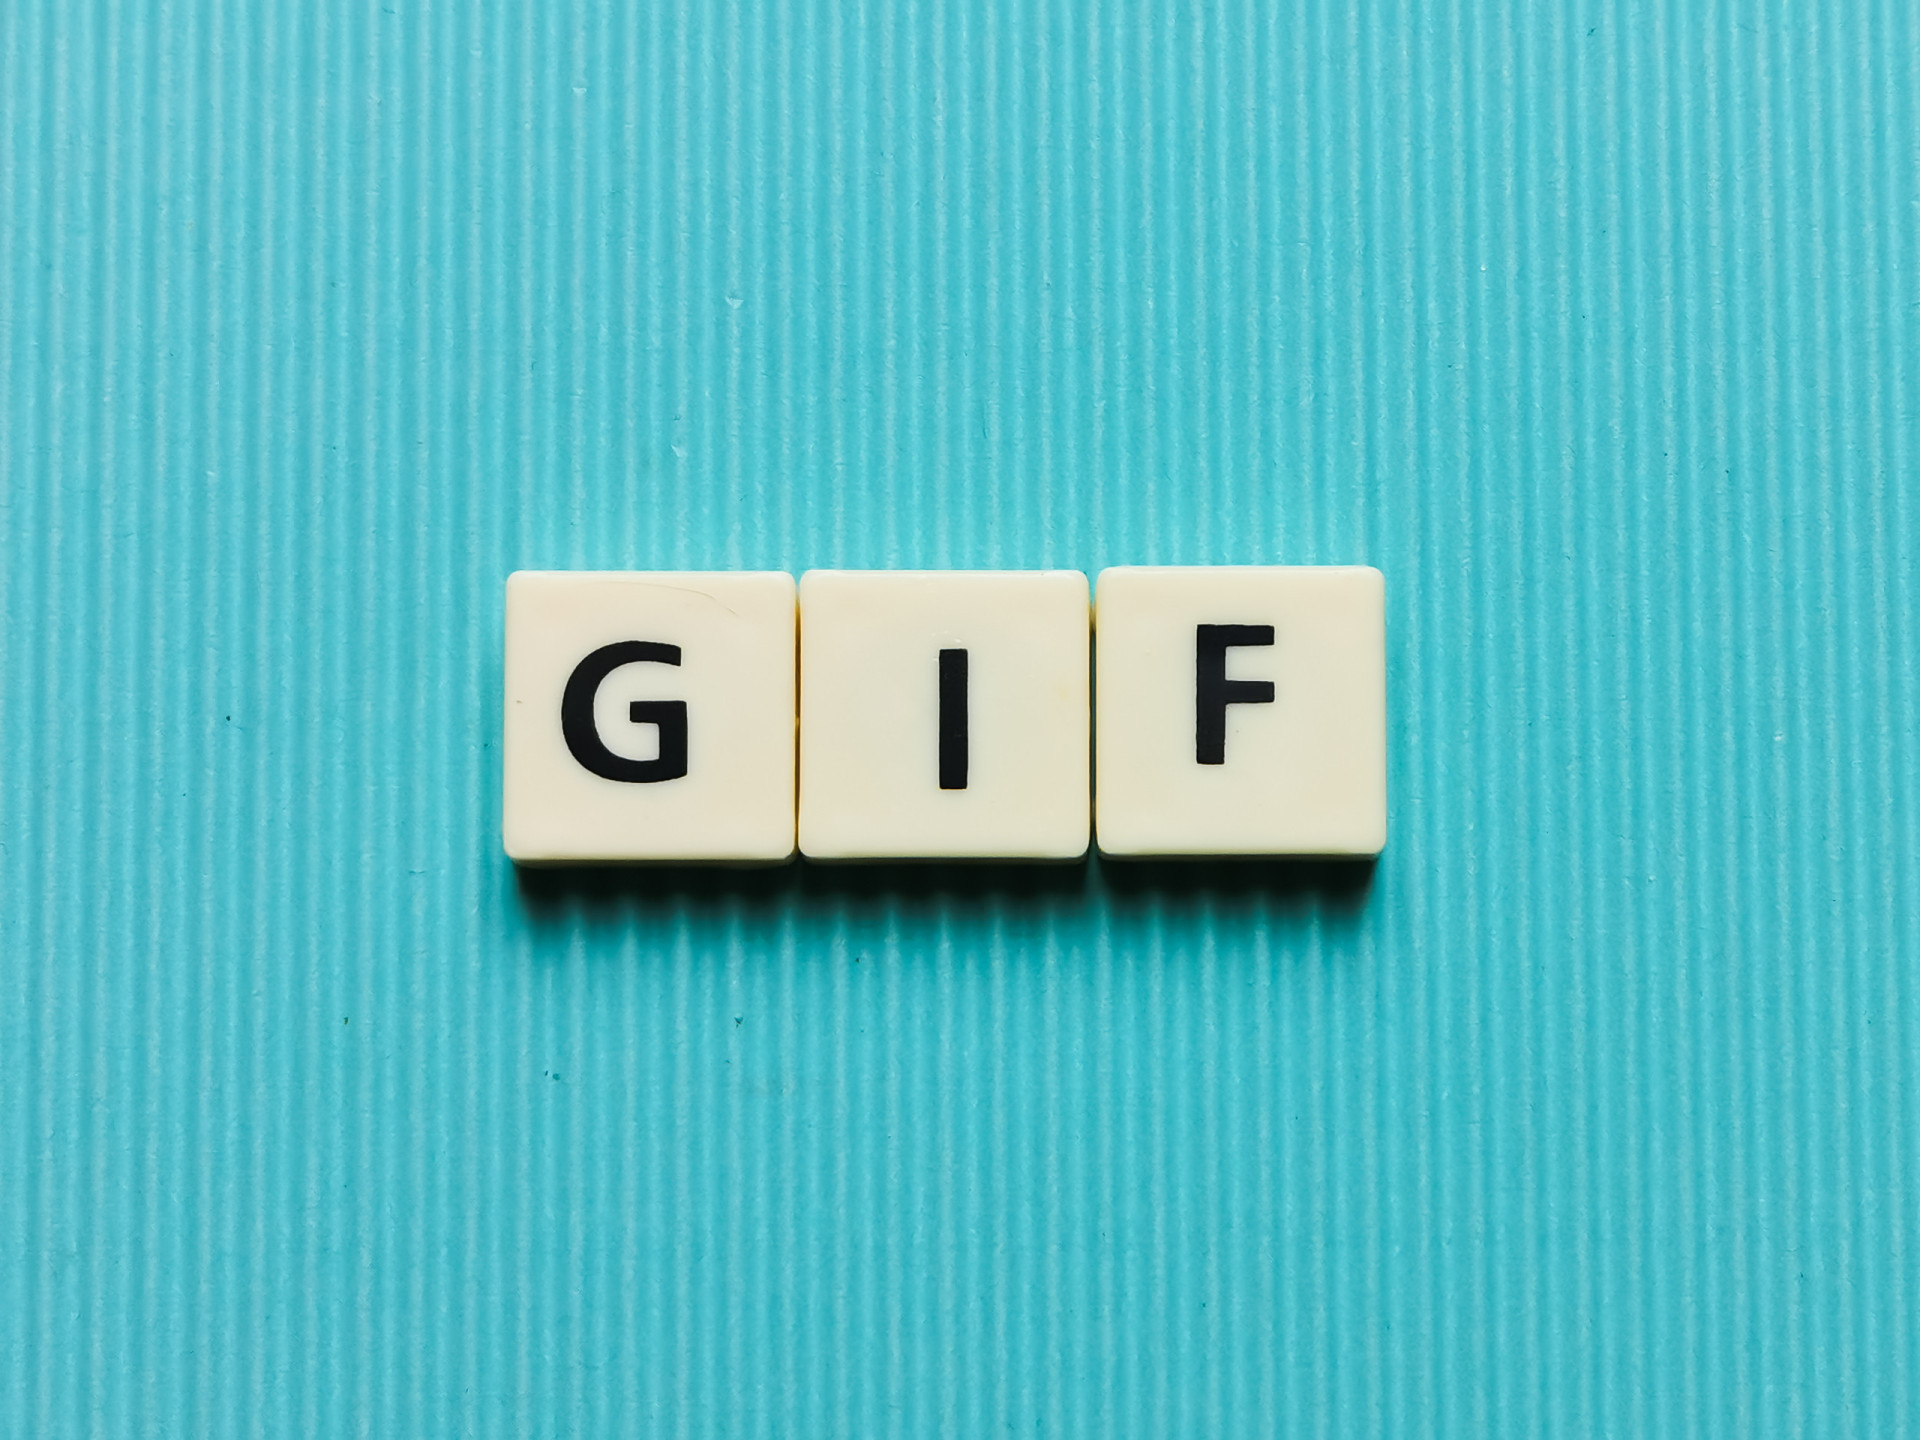 <p>When people search for these moving images, many don't know that GIF stands for "graphics interchange format."</p><p>You may also like:<a href="https://www.starsinsider.com/n/426588?utm_source=msn.com&utm_medium=display&utm_campaign=referral_description&utm_content=537630en-ae"> These celebrities can't cook to save their lives</a></p>